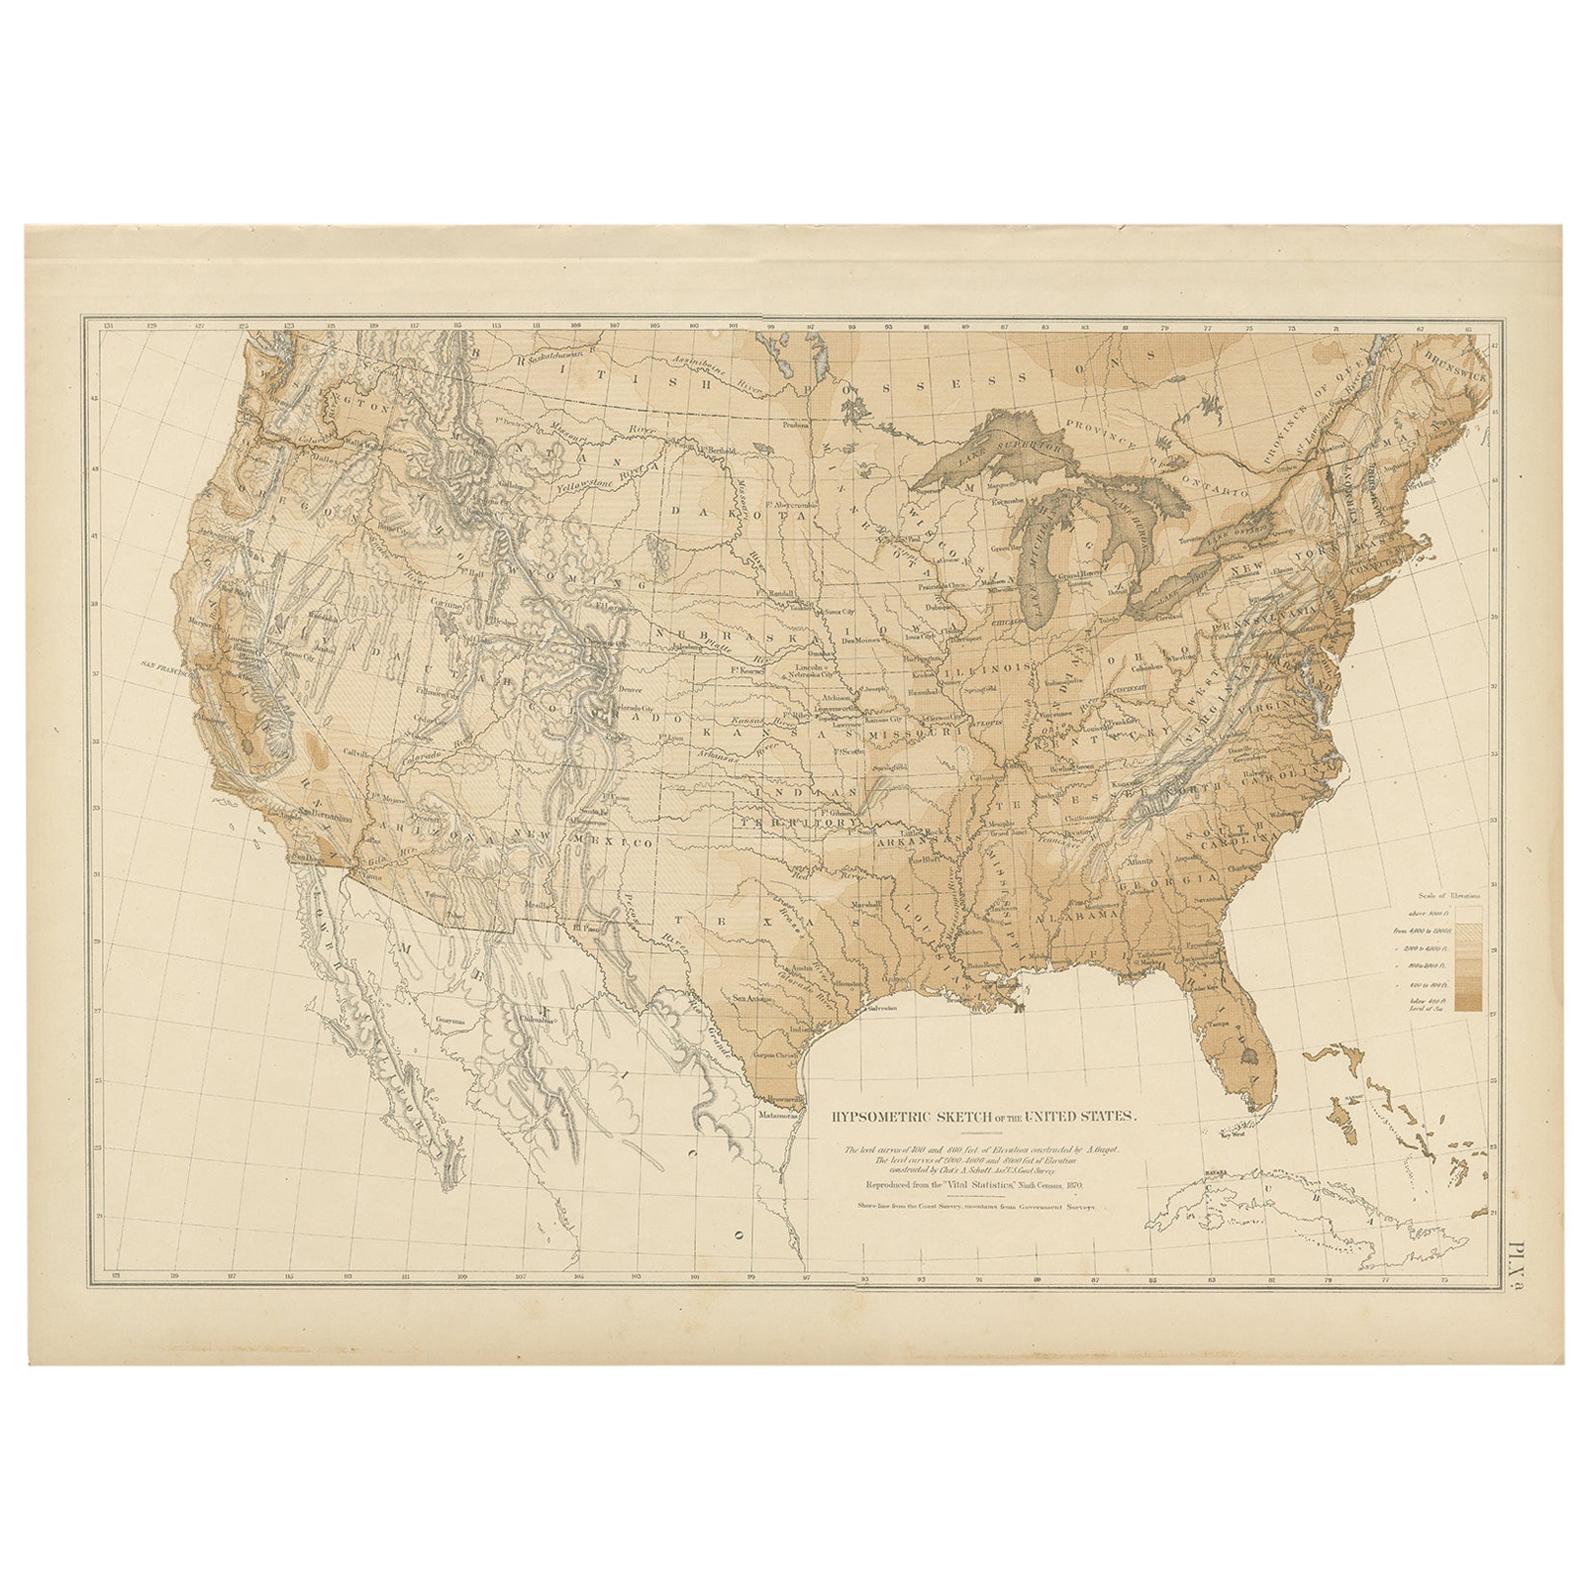 Pl. 9 Antique Hypsometric Sketch of the United States by Walker, 1874